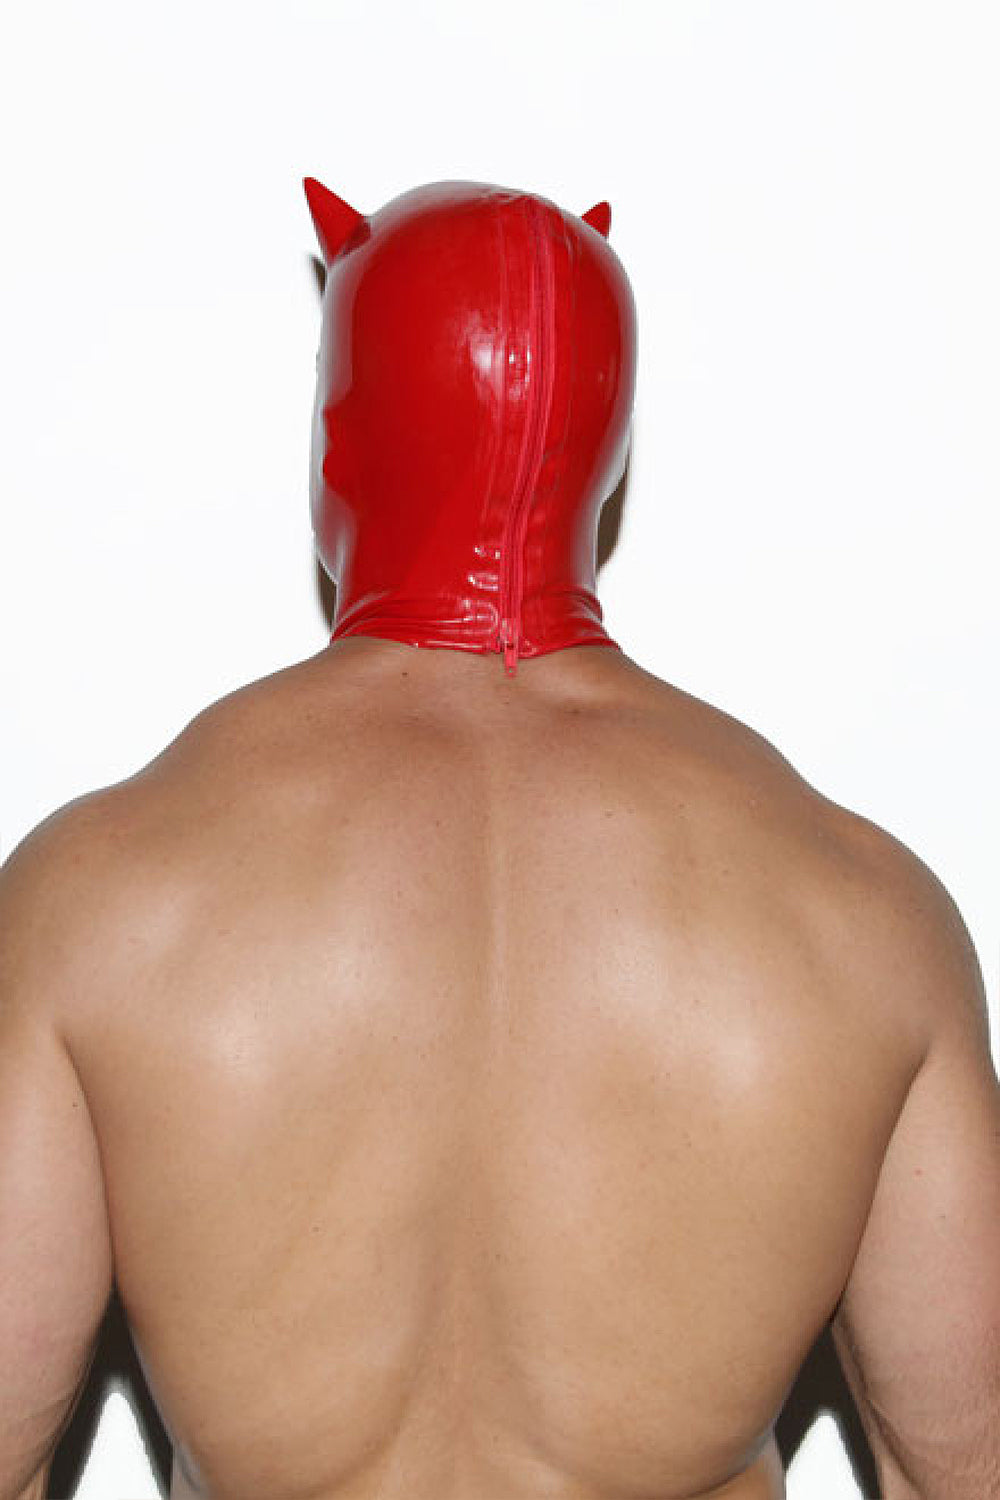 Limited Edition Red Devil Latex Mask - Slick It Up 